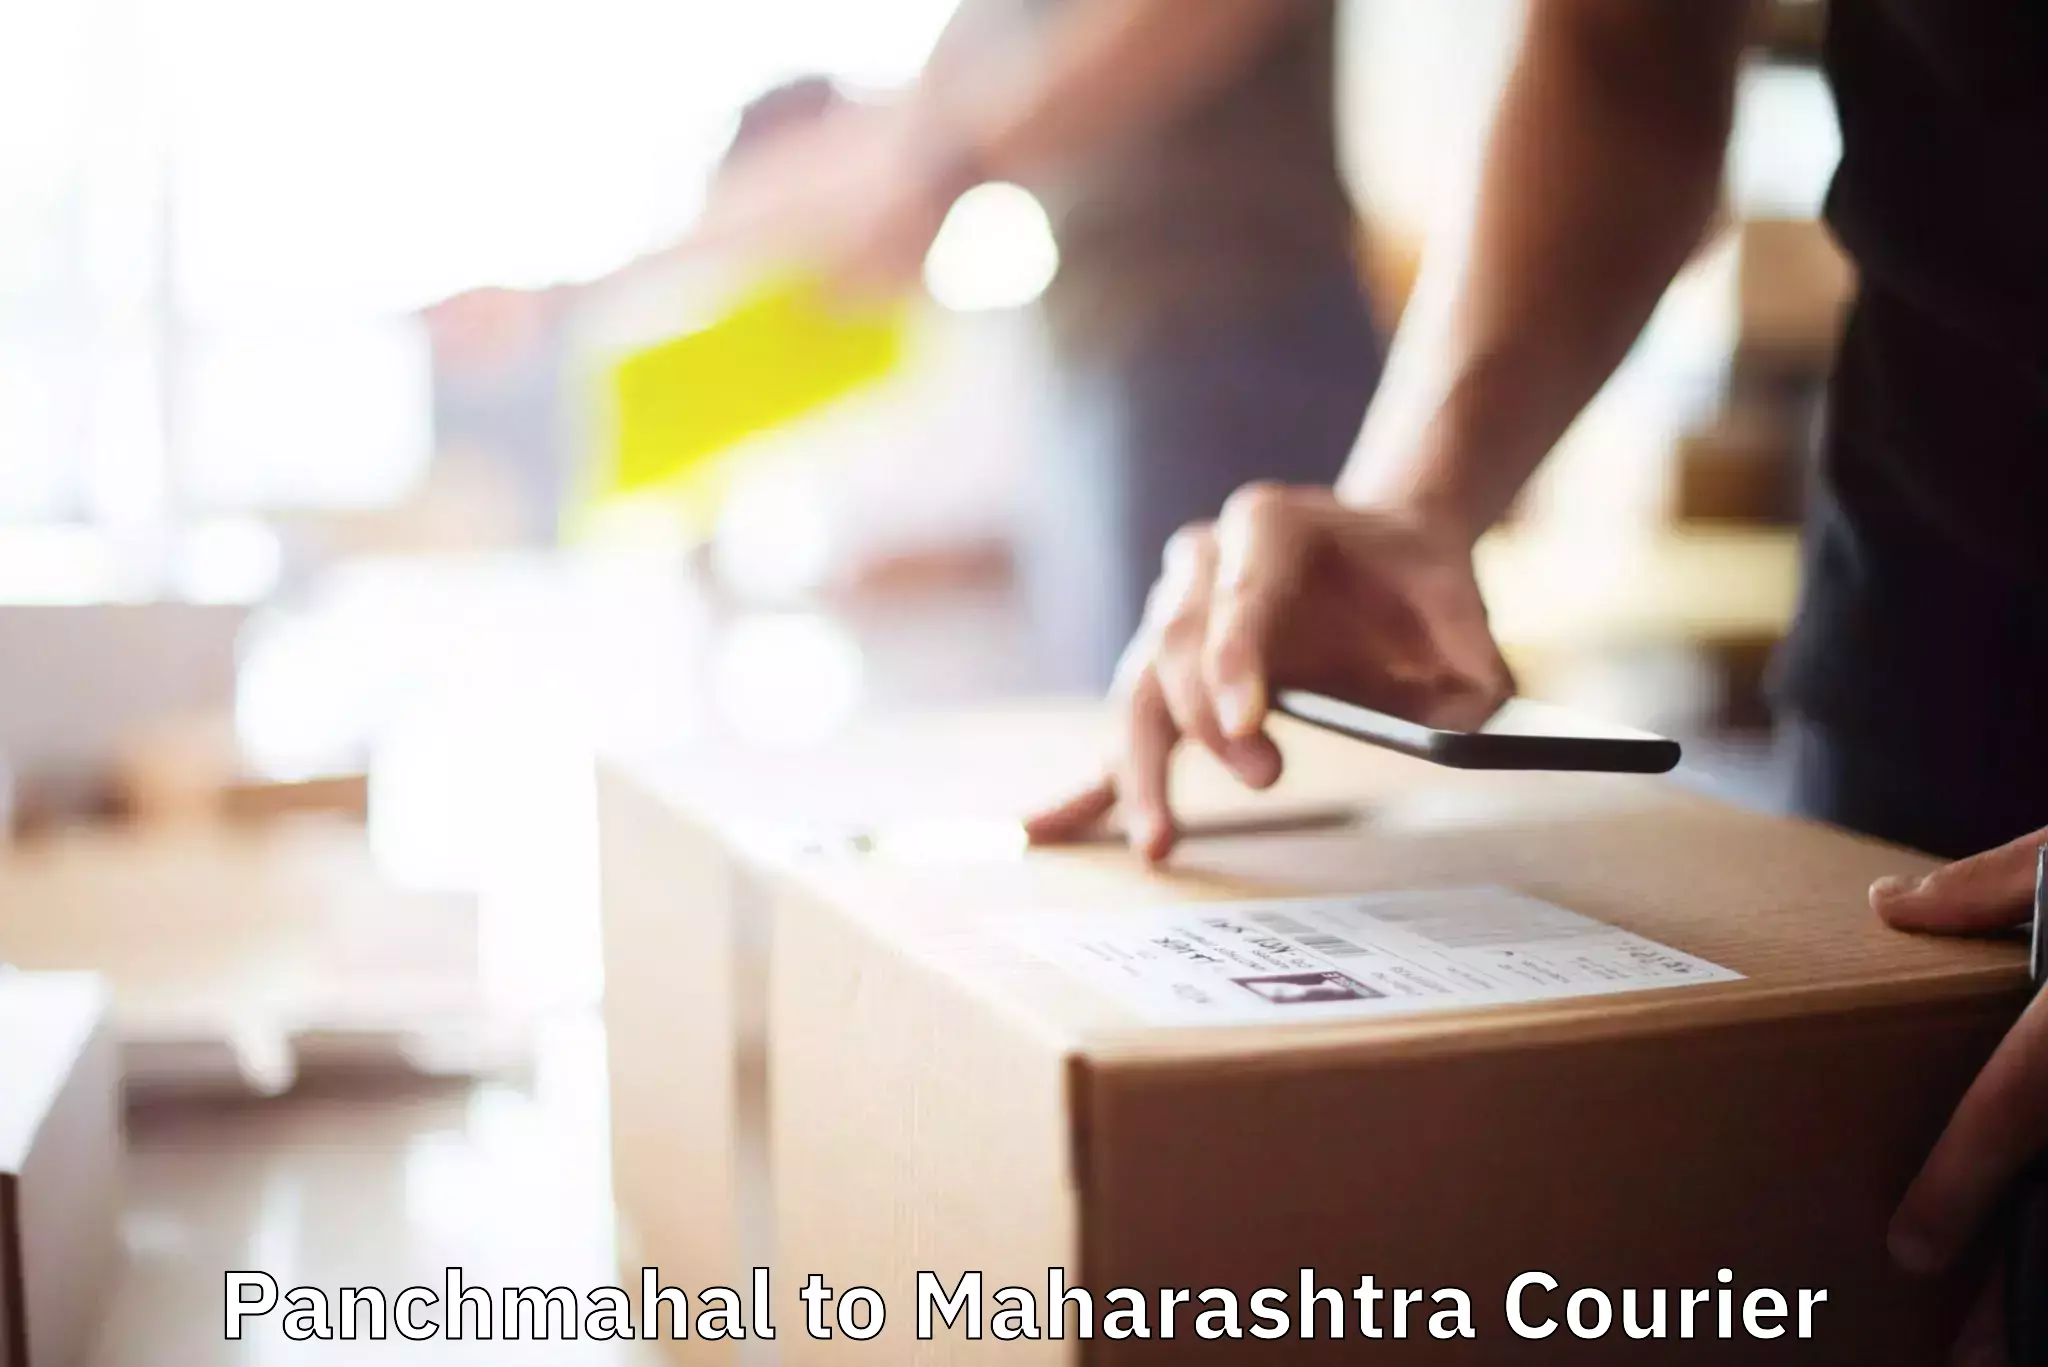 Furniture transport and storage in Panchmahal to Maharashtra